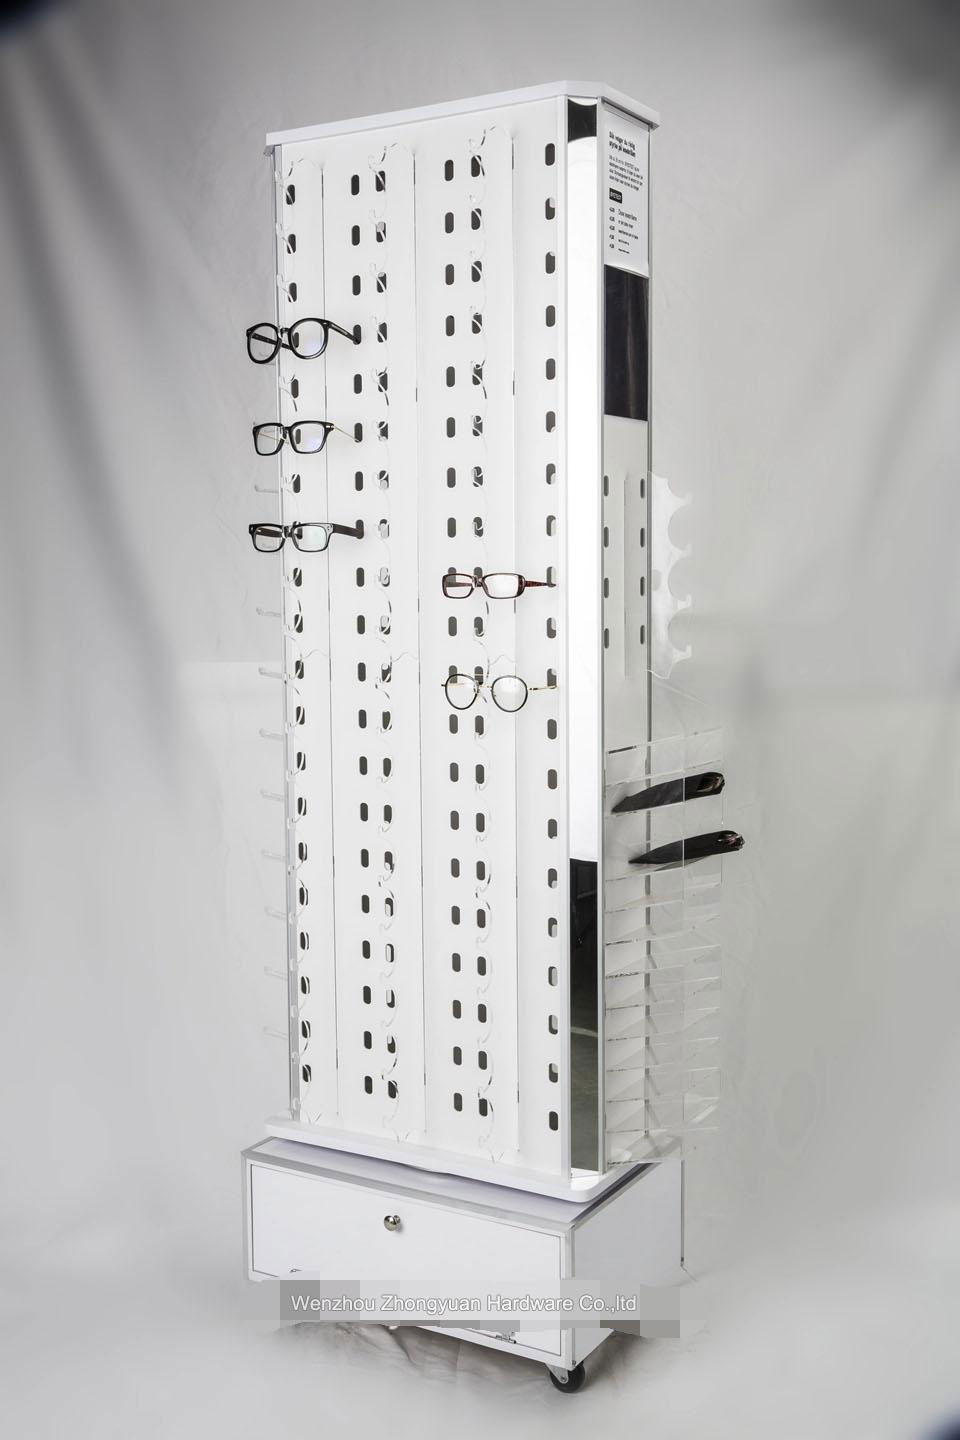 Floor Eyewear Optical Sunglasses Display Stand For Mall Glasses Store Furniture 4